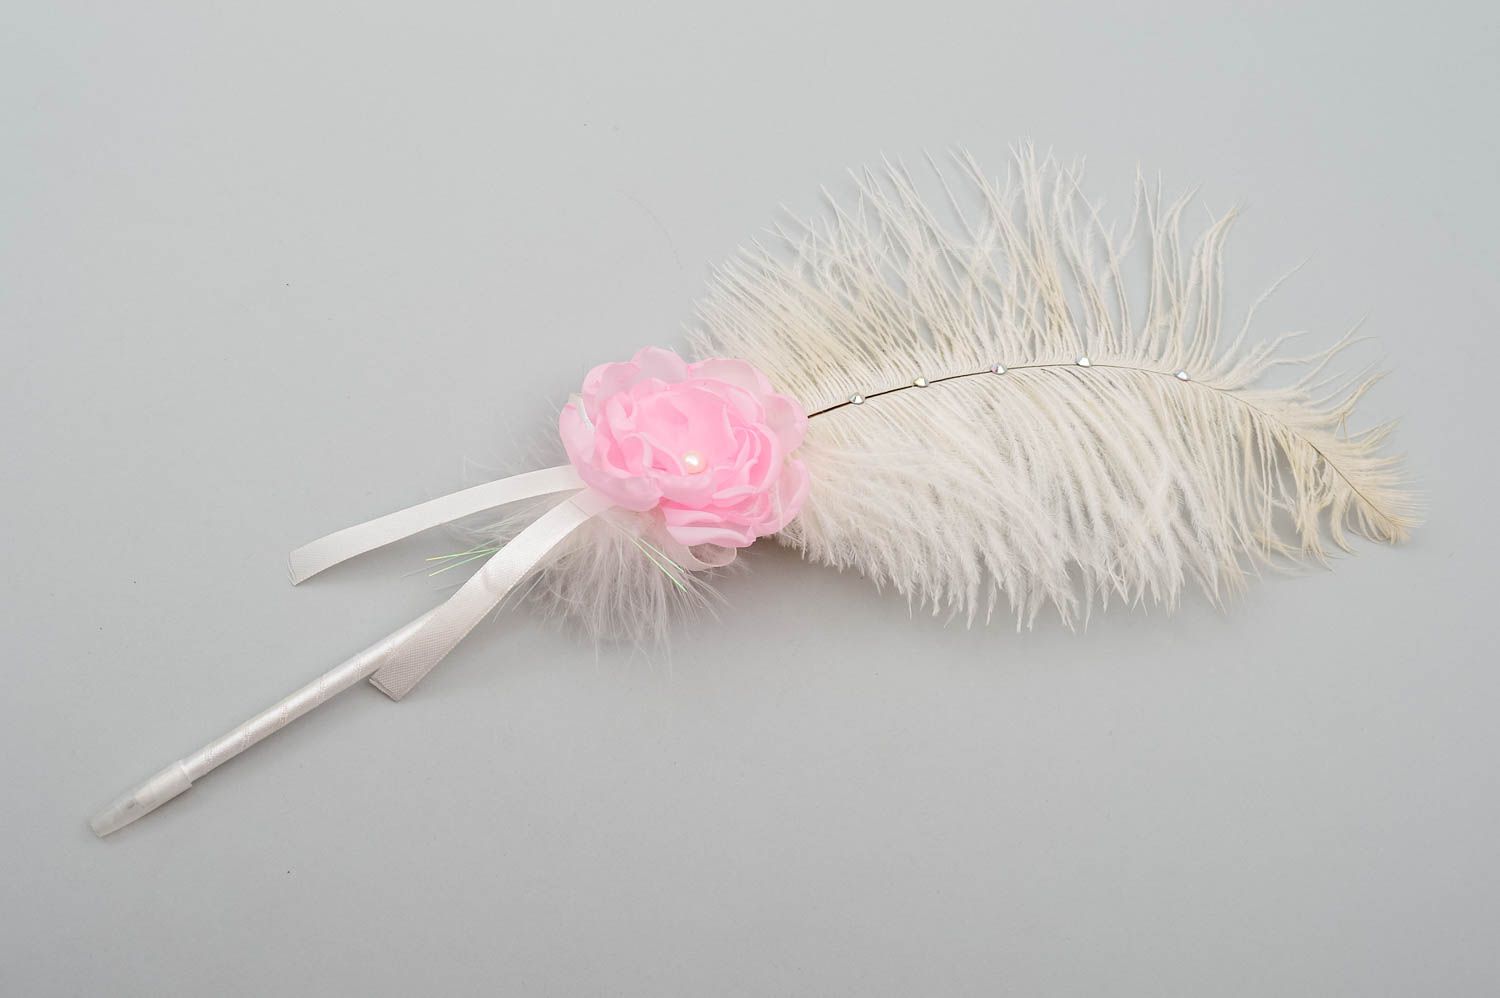 Handmade pen designer pen with feathers for wedding bridal accessories photo 2